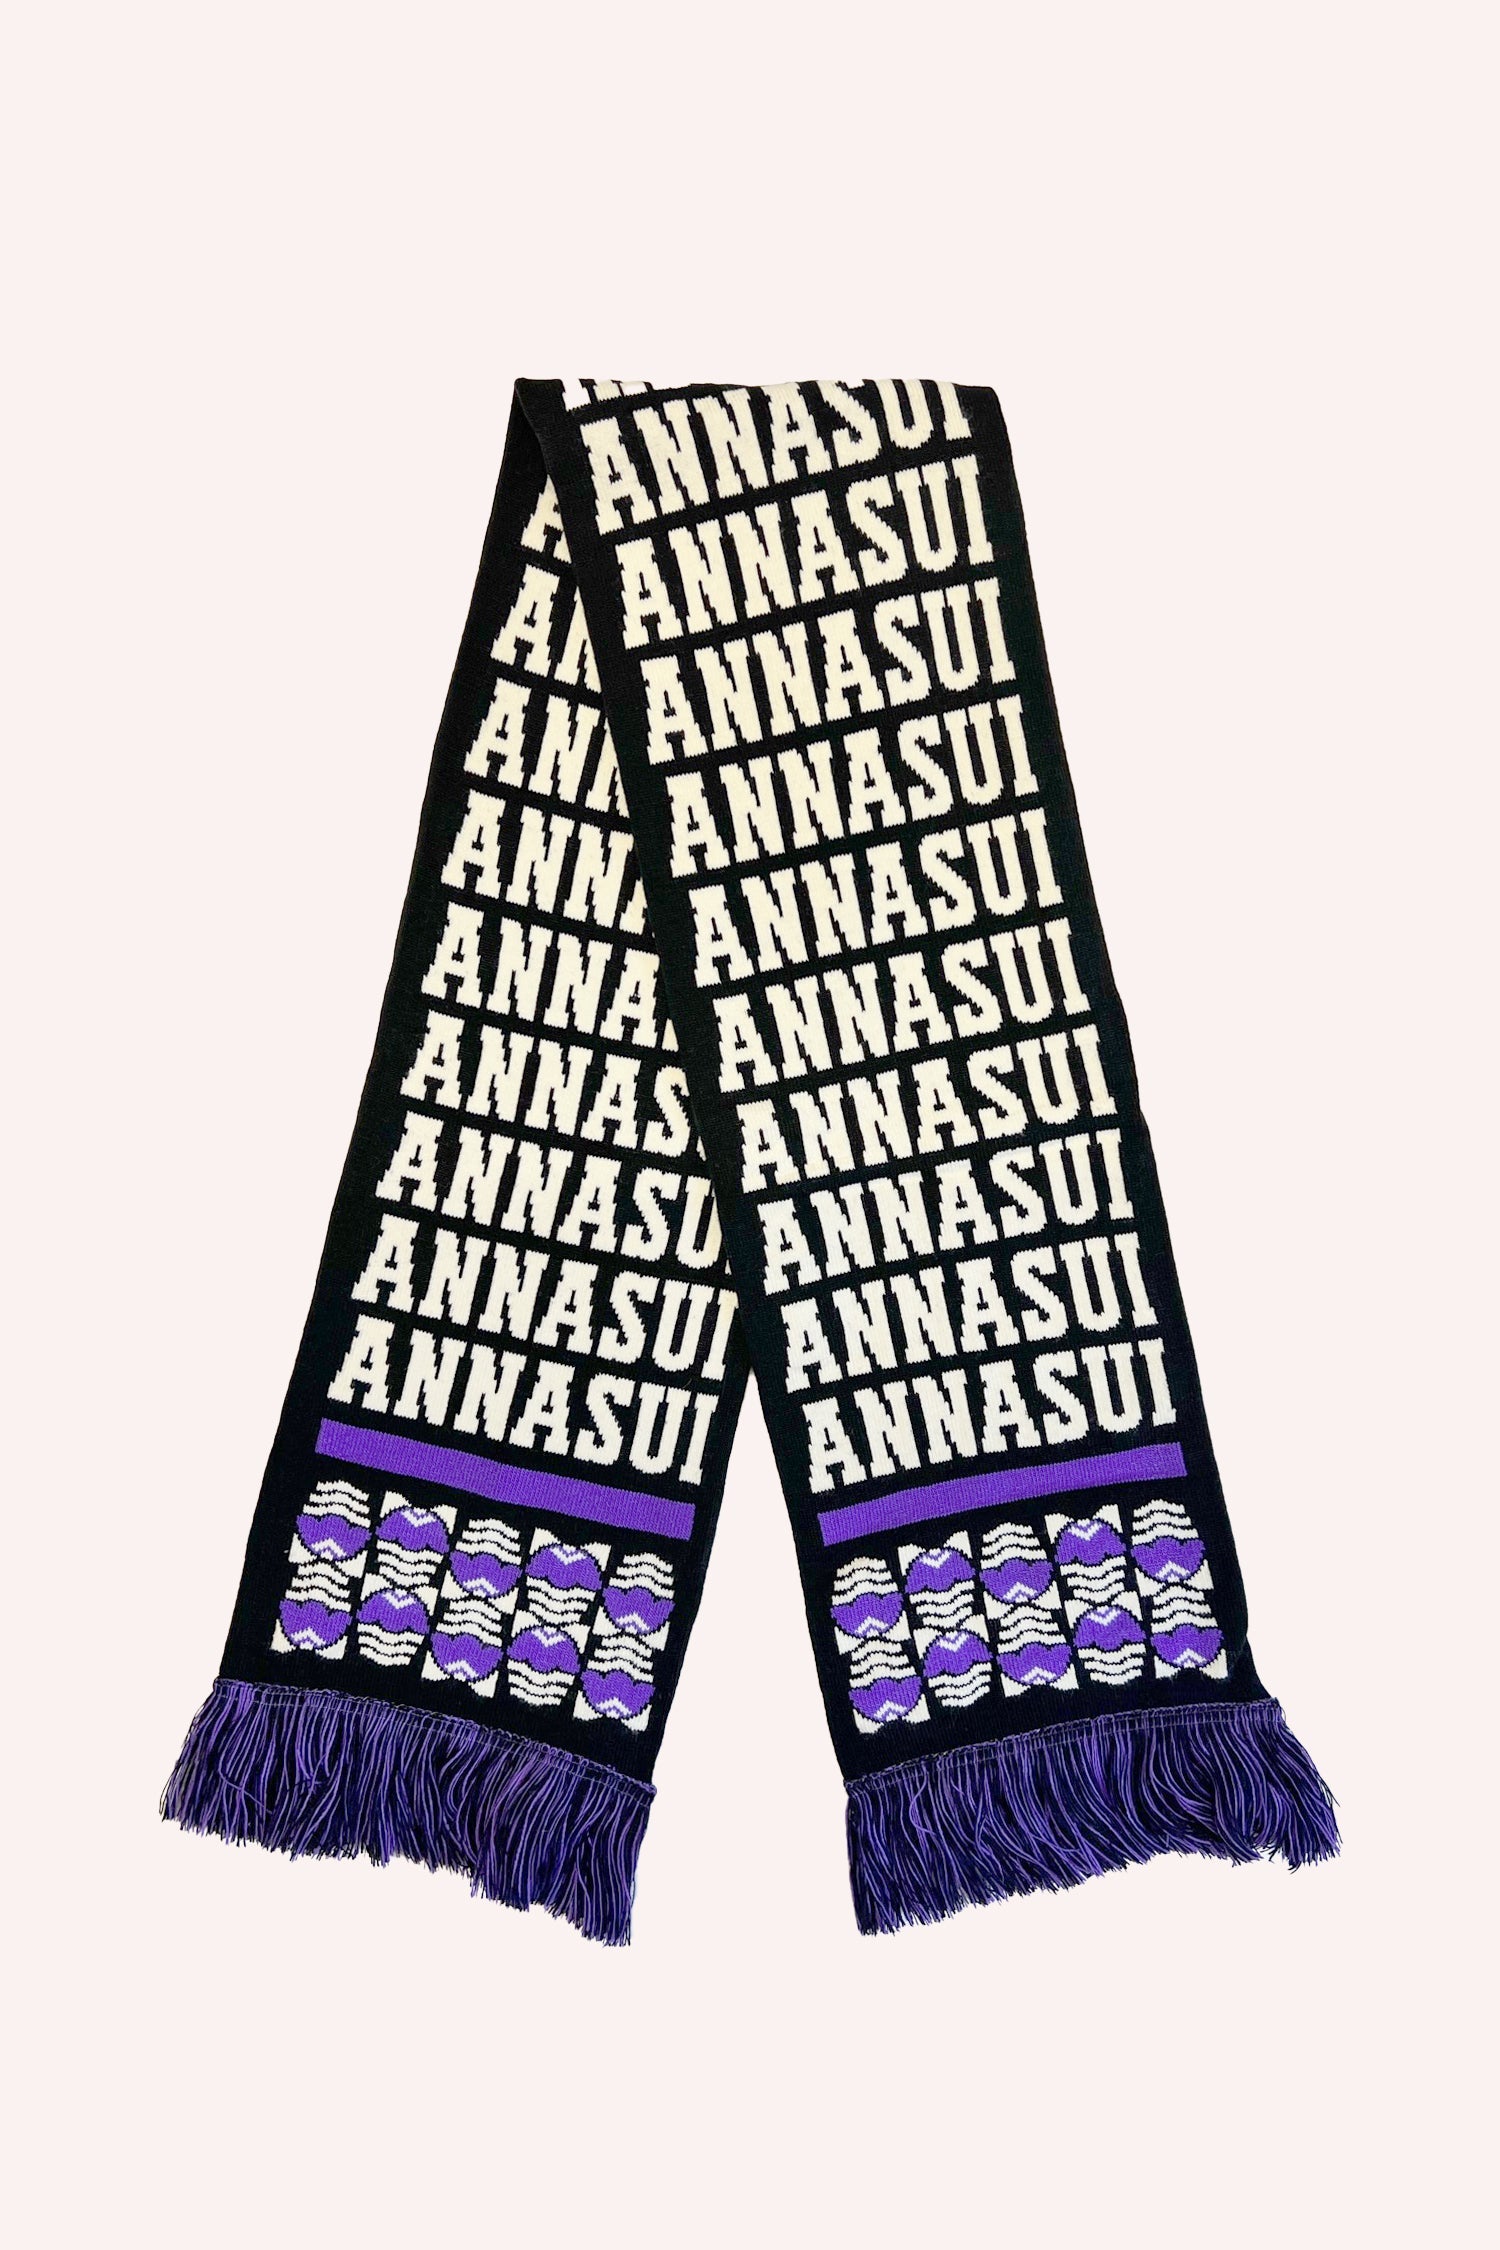 The Scarf in black with pattern Anna Sui, with purple fringes beneath a stylized egg design, and a purple line on both ends